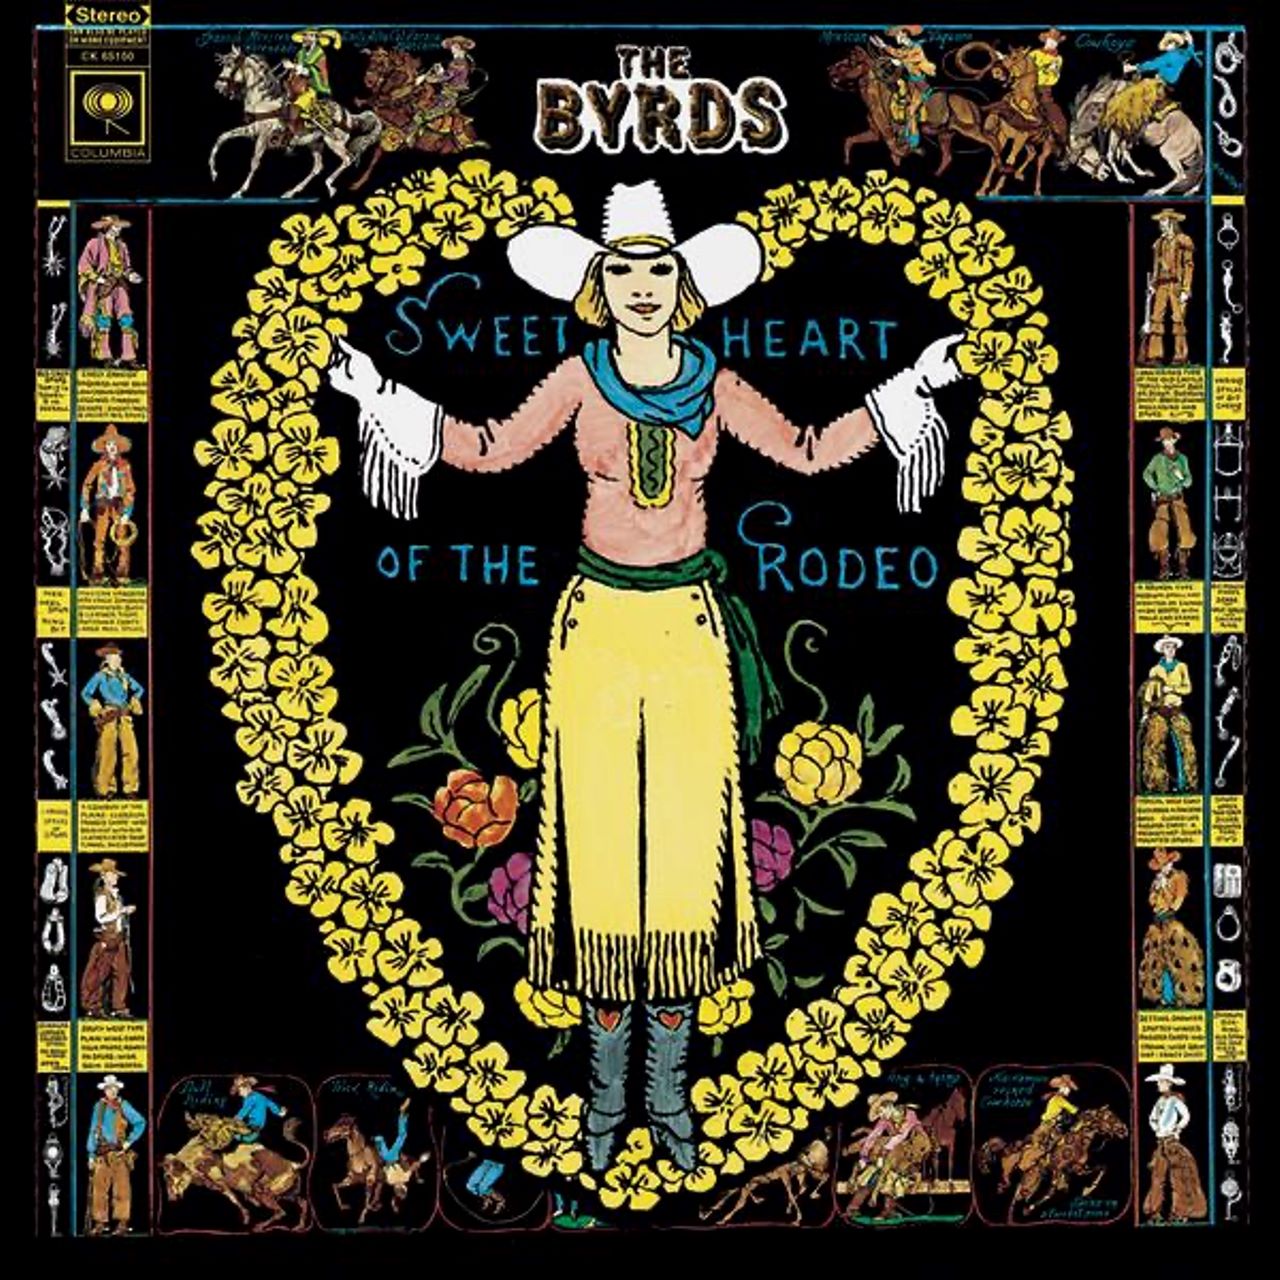 Byrds – Sweetheart Of The Rodeo cover album